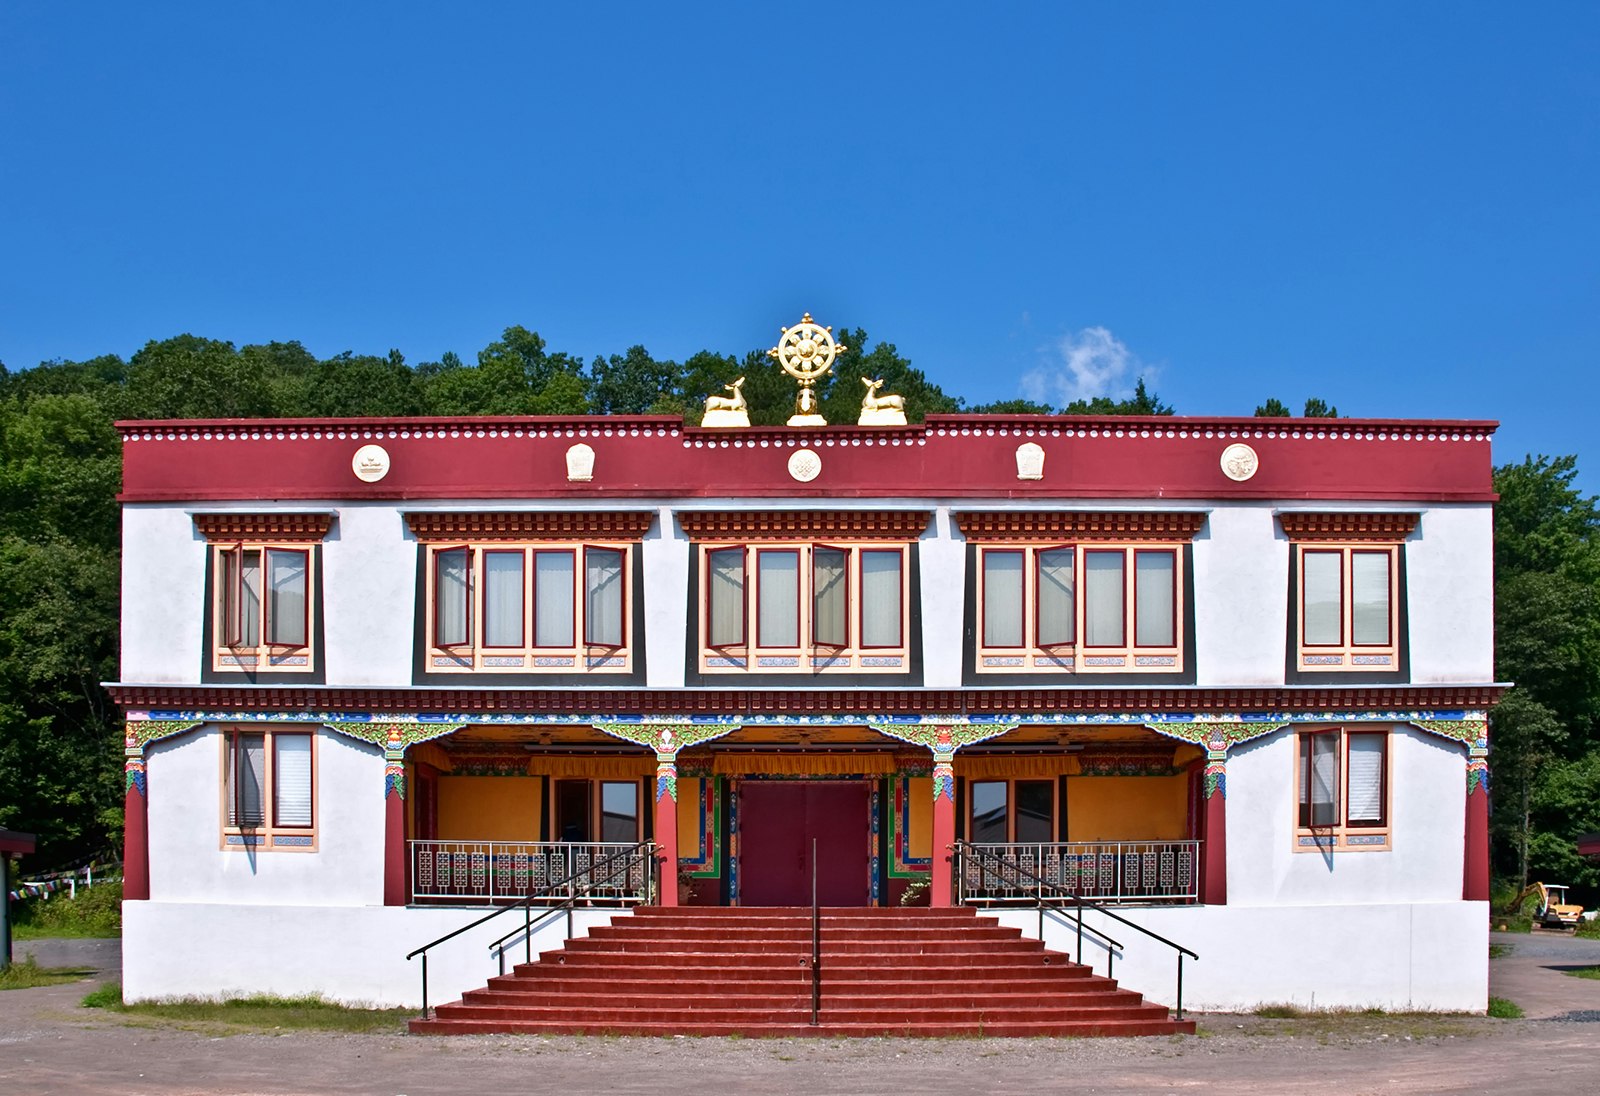 ornate red-and-white monastery in Woodstock, New York